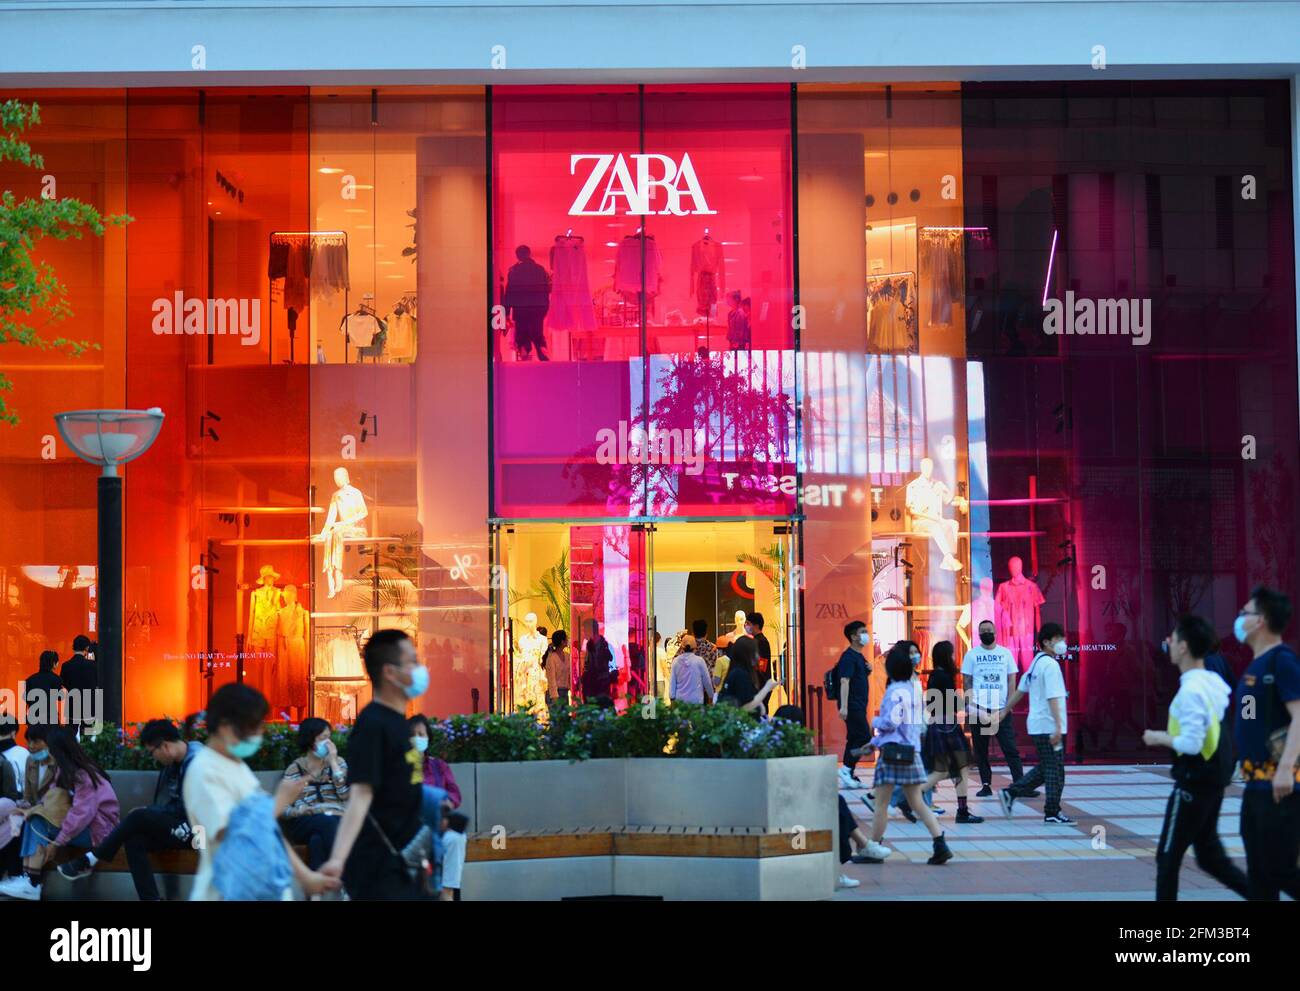 BEIJING, CHINA - MAY 5, 2021 - Zara's largest store in Asia is at  Wangfujing Street in Beijing, China, May 5, 2021. The store, also the first Zara  global flagship store in